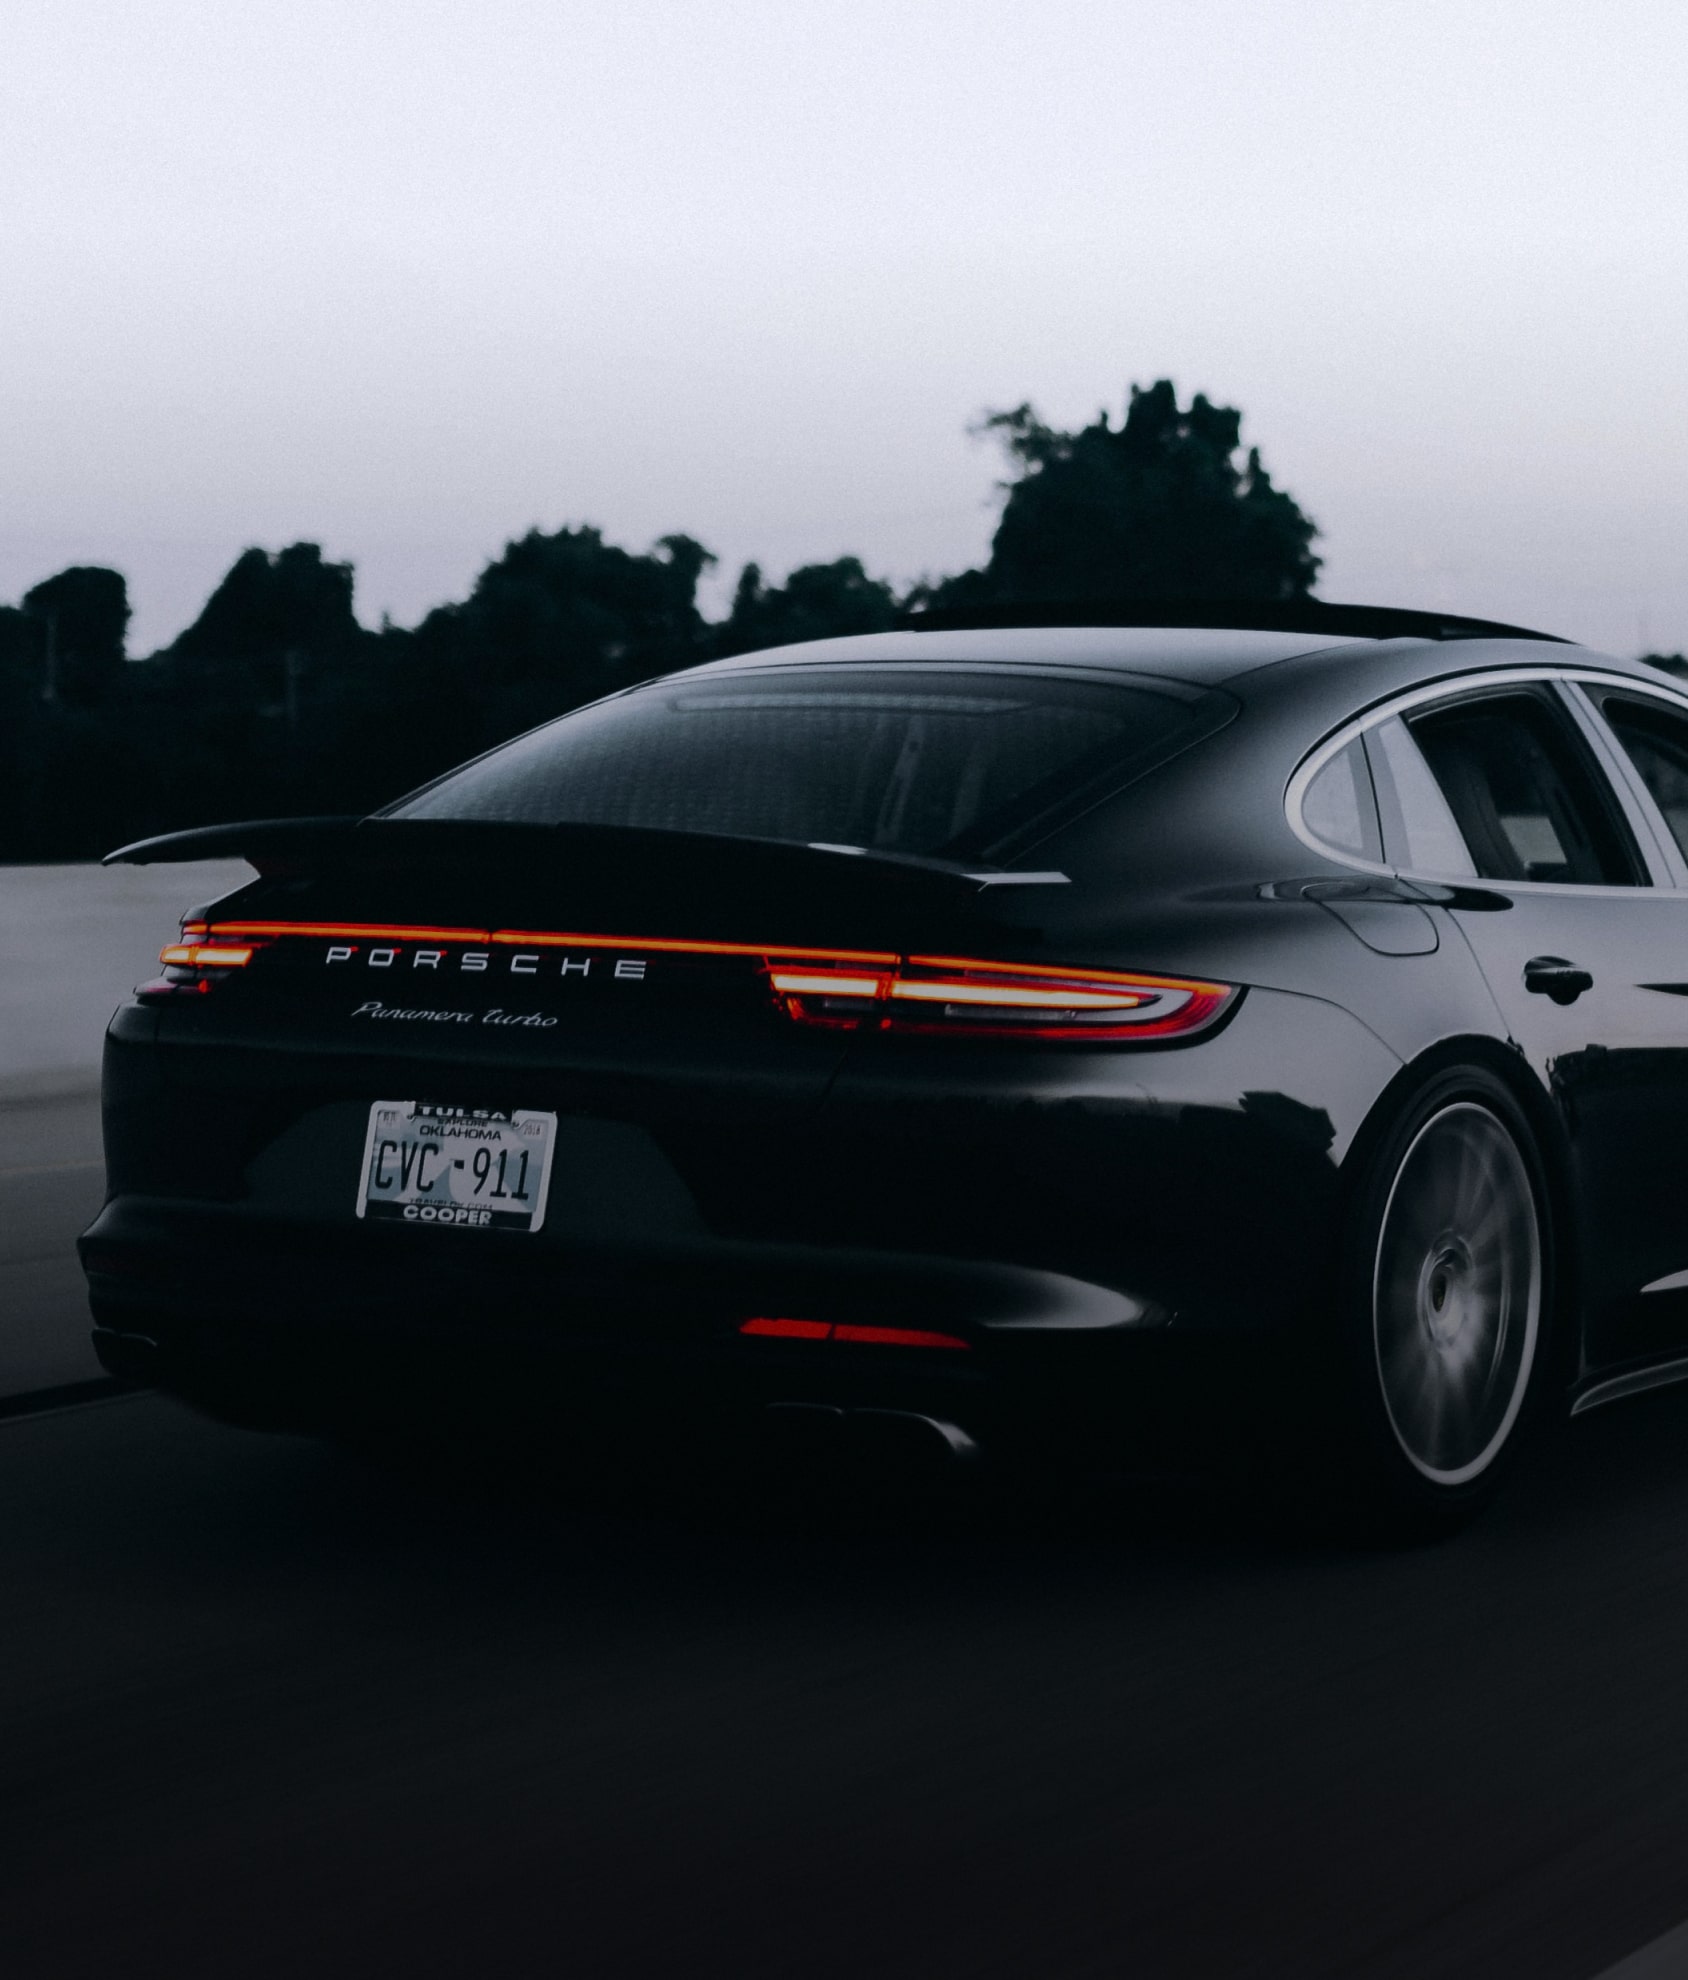 Porsche believes this is the year for fancy cars